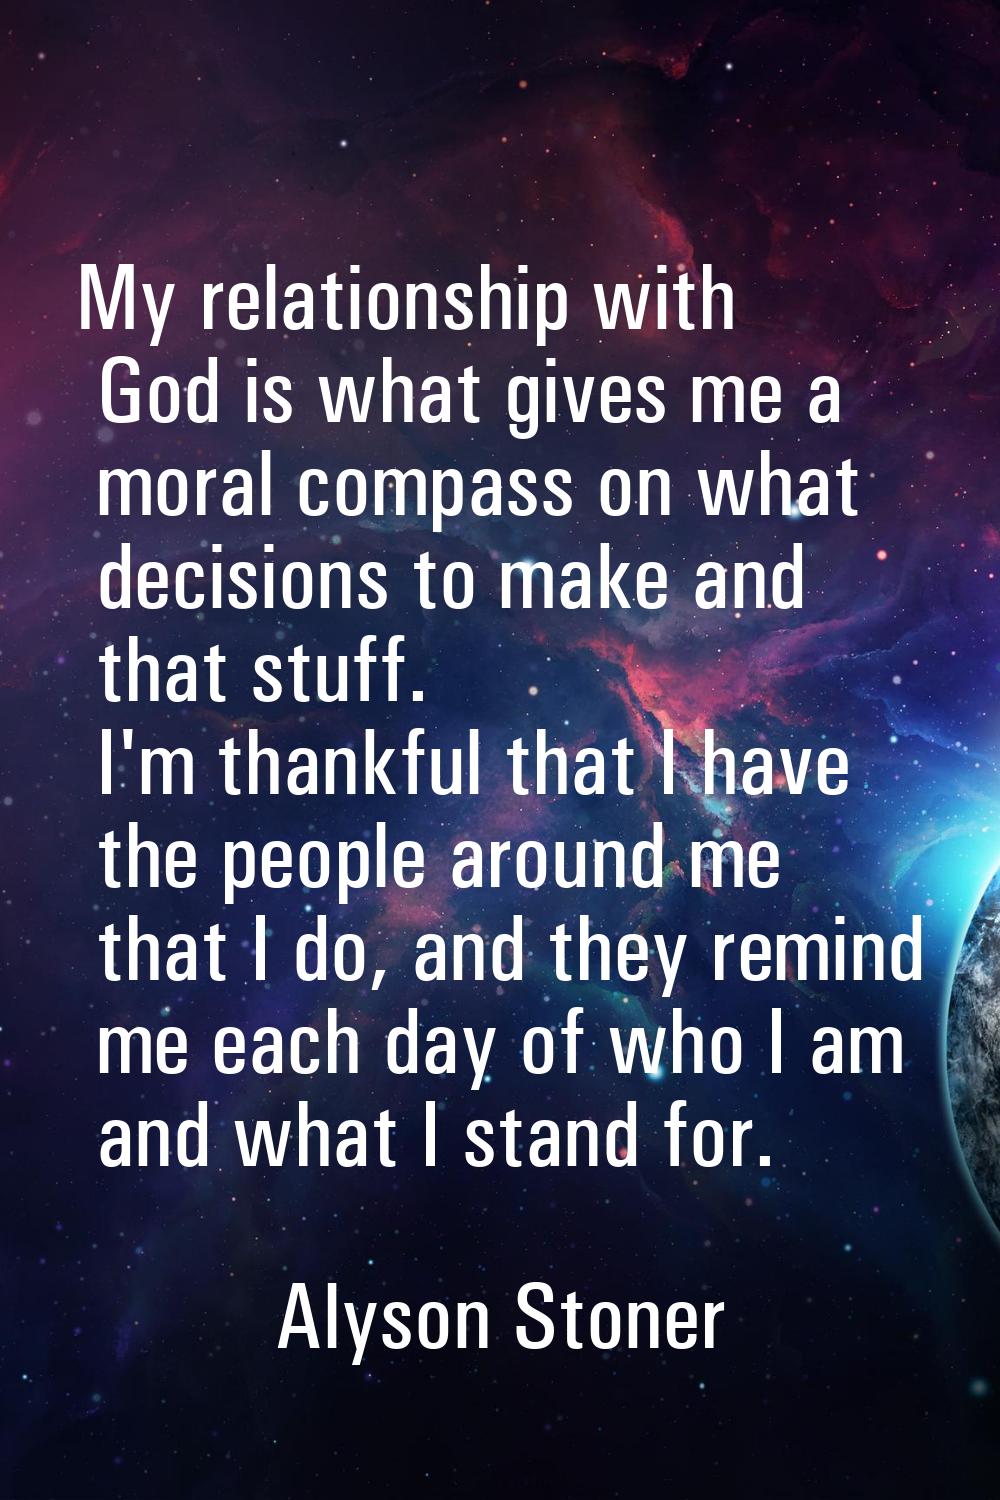 My relationship with God is what gives me a moral compass on what decisions to make and that stuff.